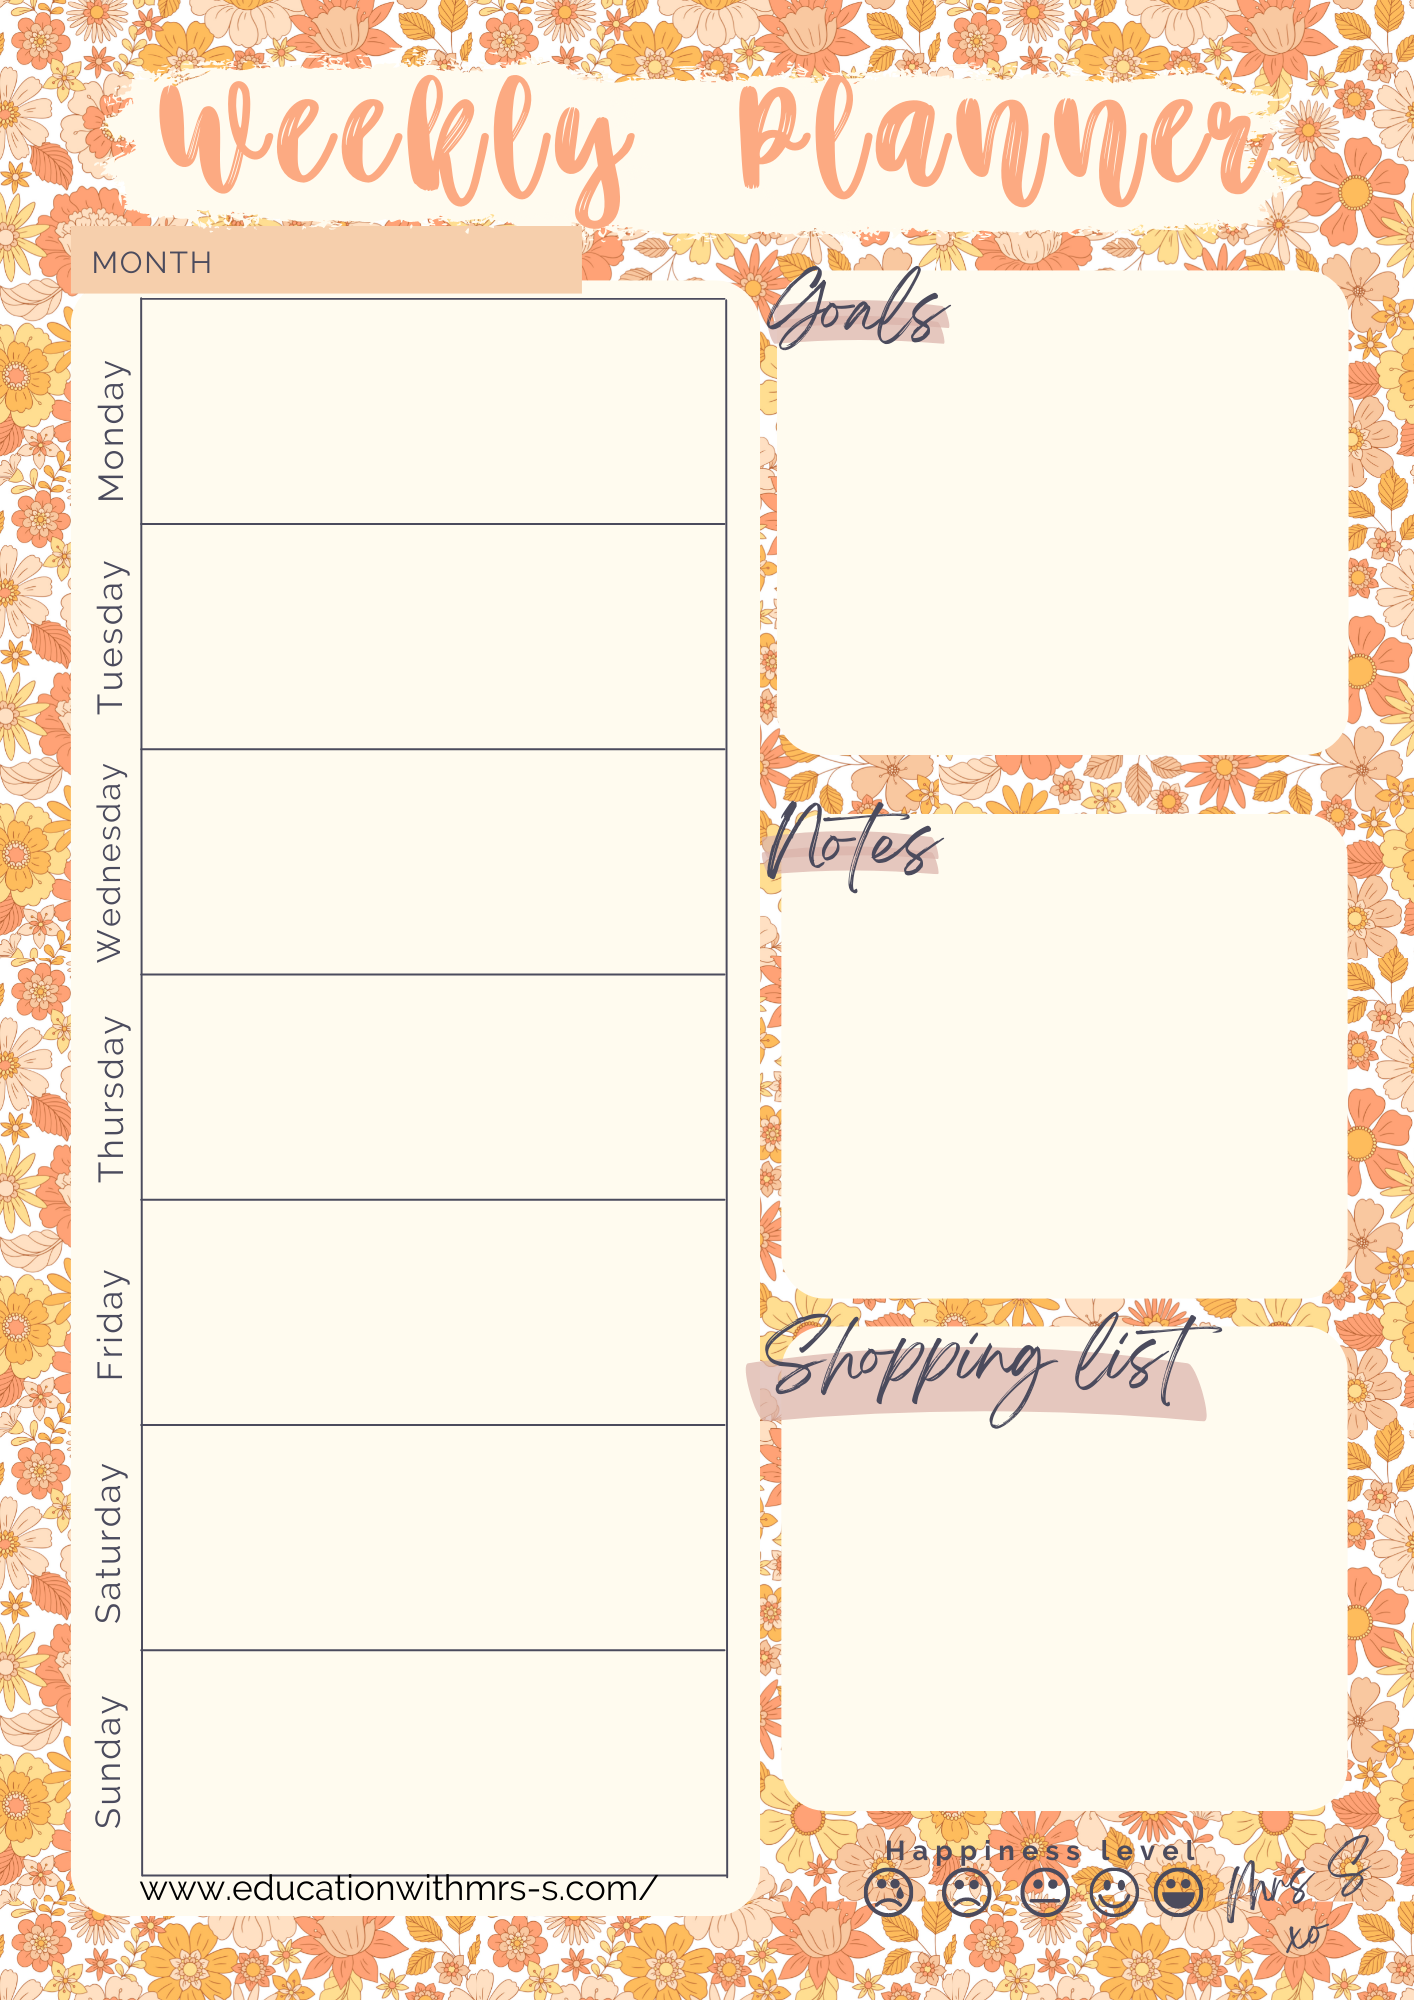 Autumn Flowers A4 Weekly Planner Pad